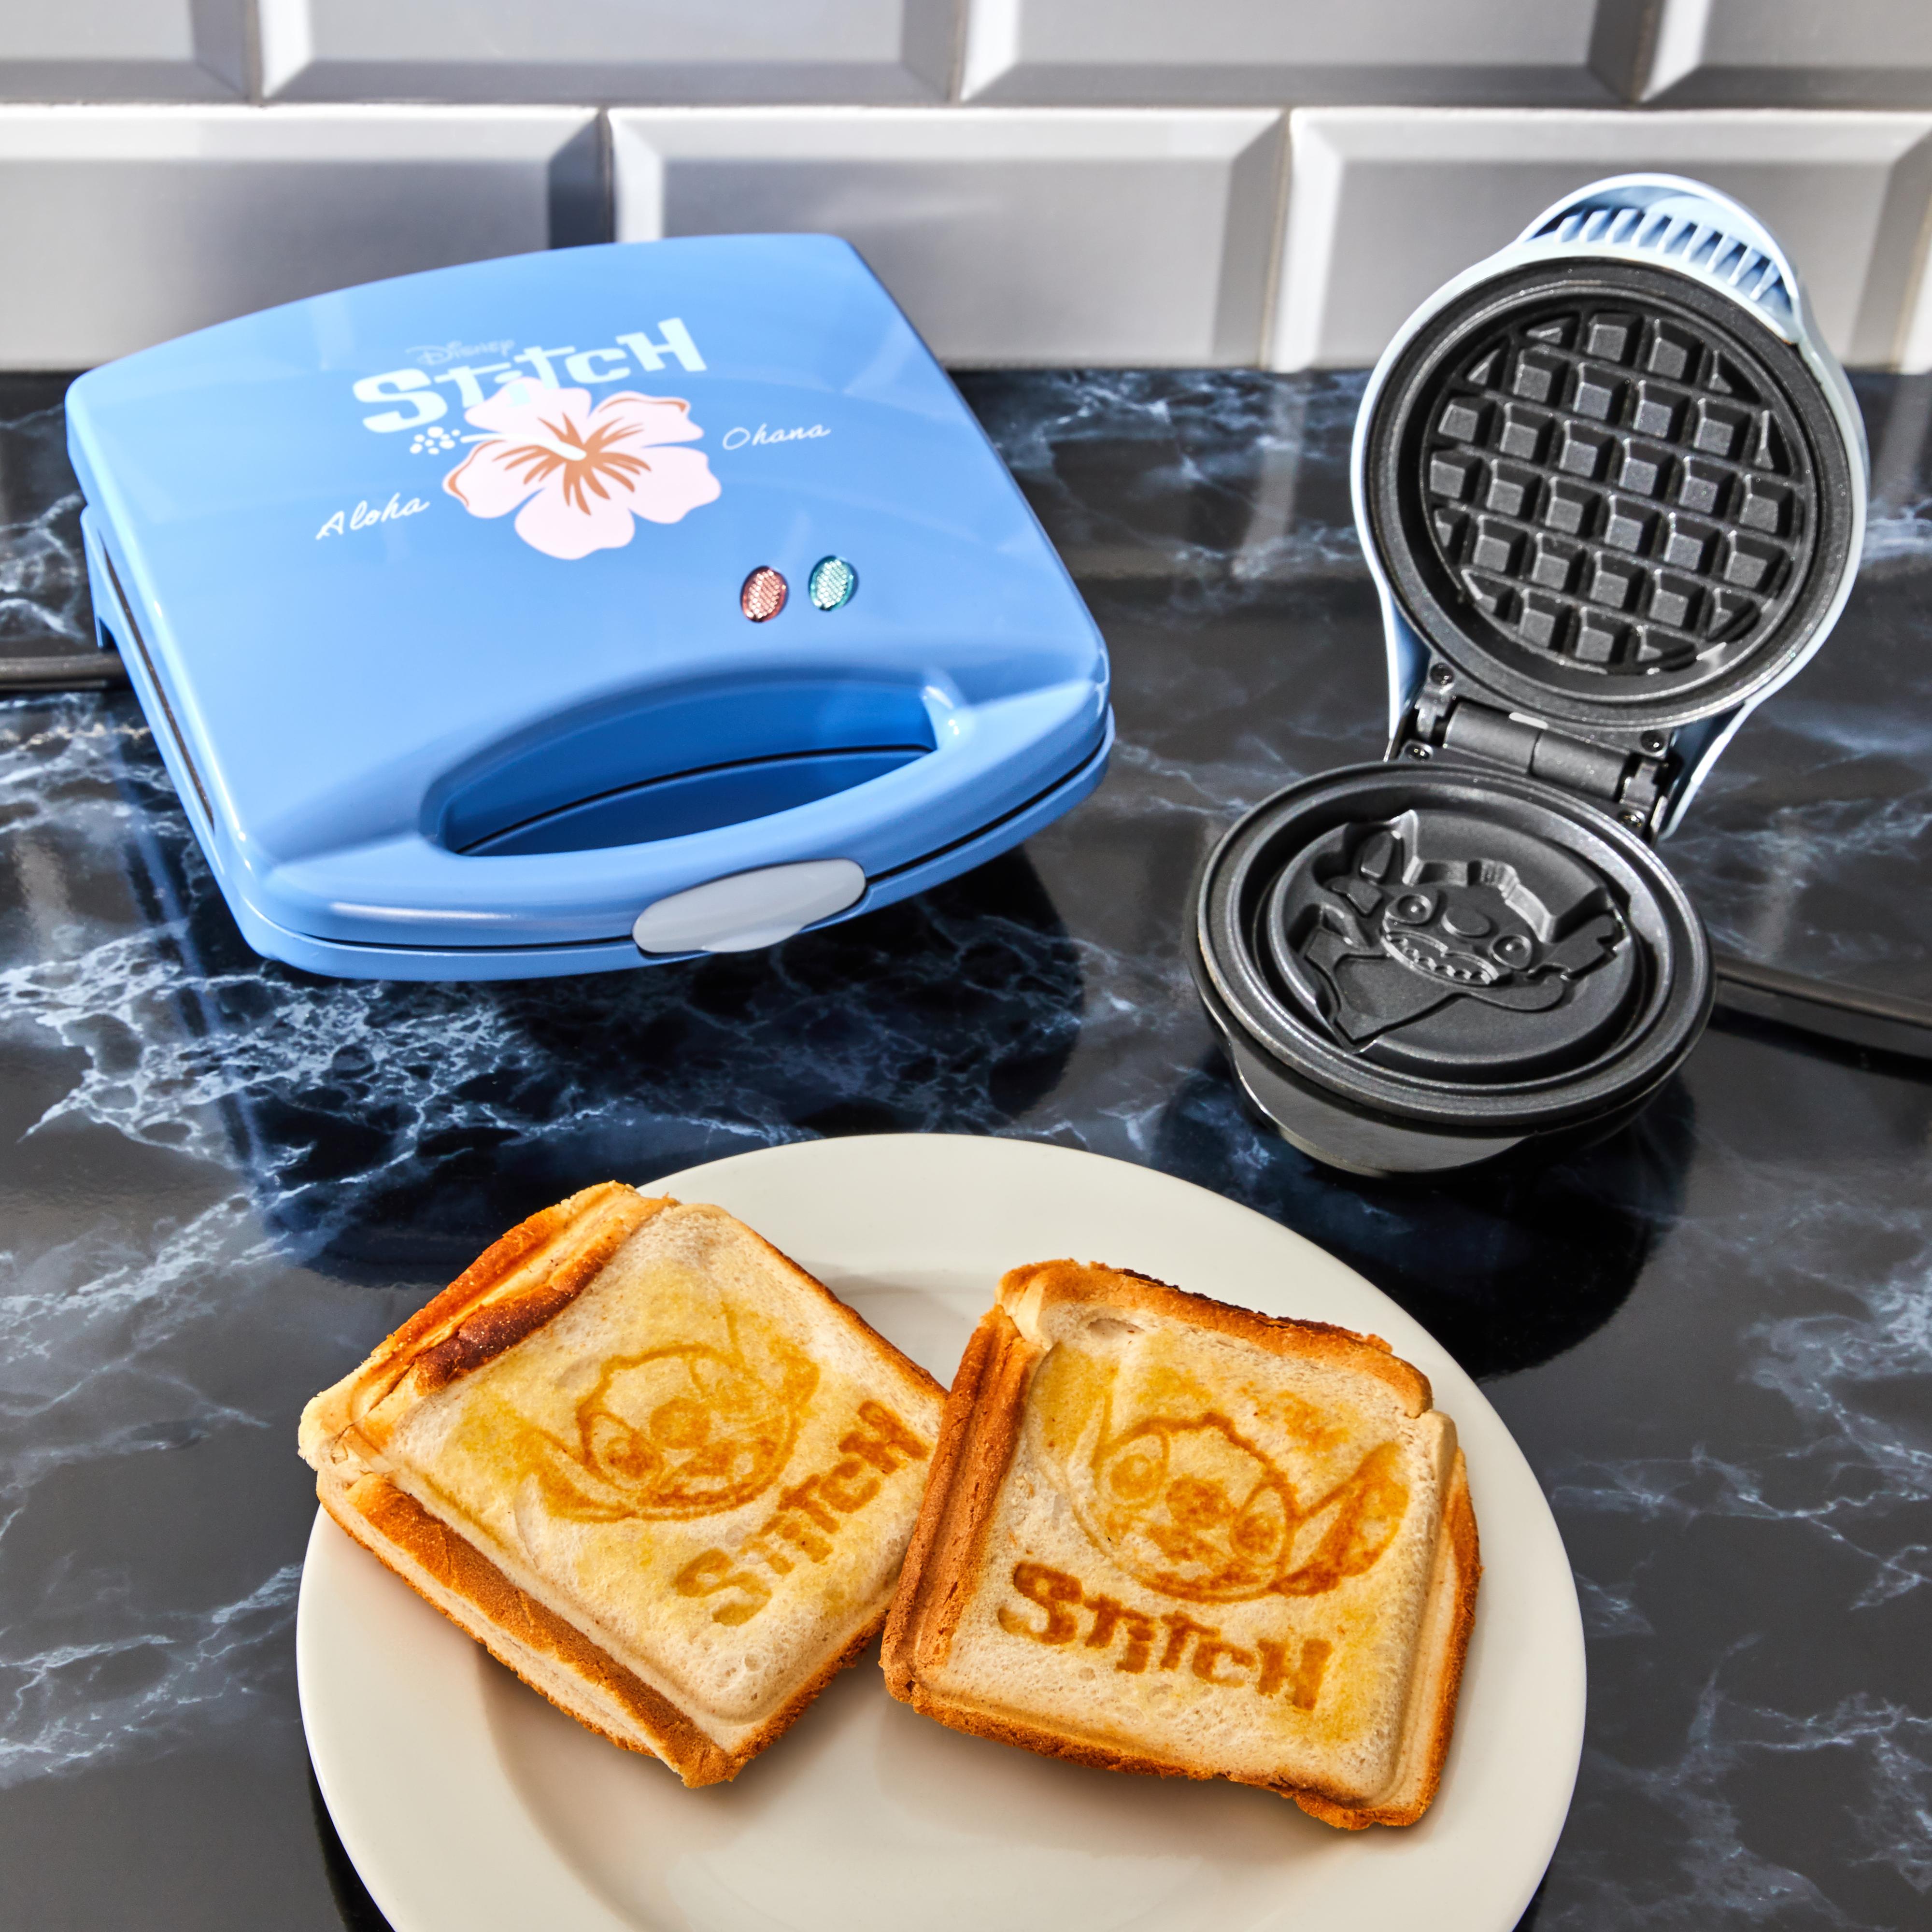 Primark on X: Say Aloha to Stitch at lunchtime 🥪✨ Grab a Stitch toasty or waffle  maker instore for £26 #PrimarkXDisney  / X